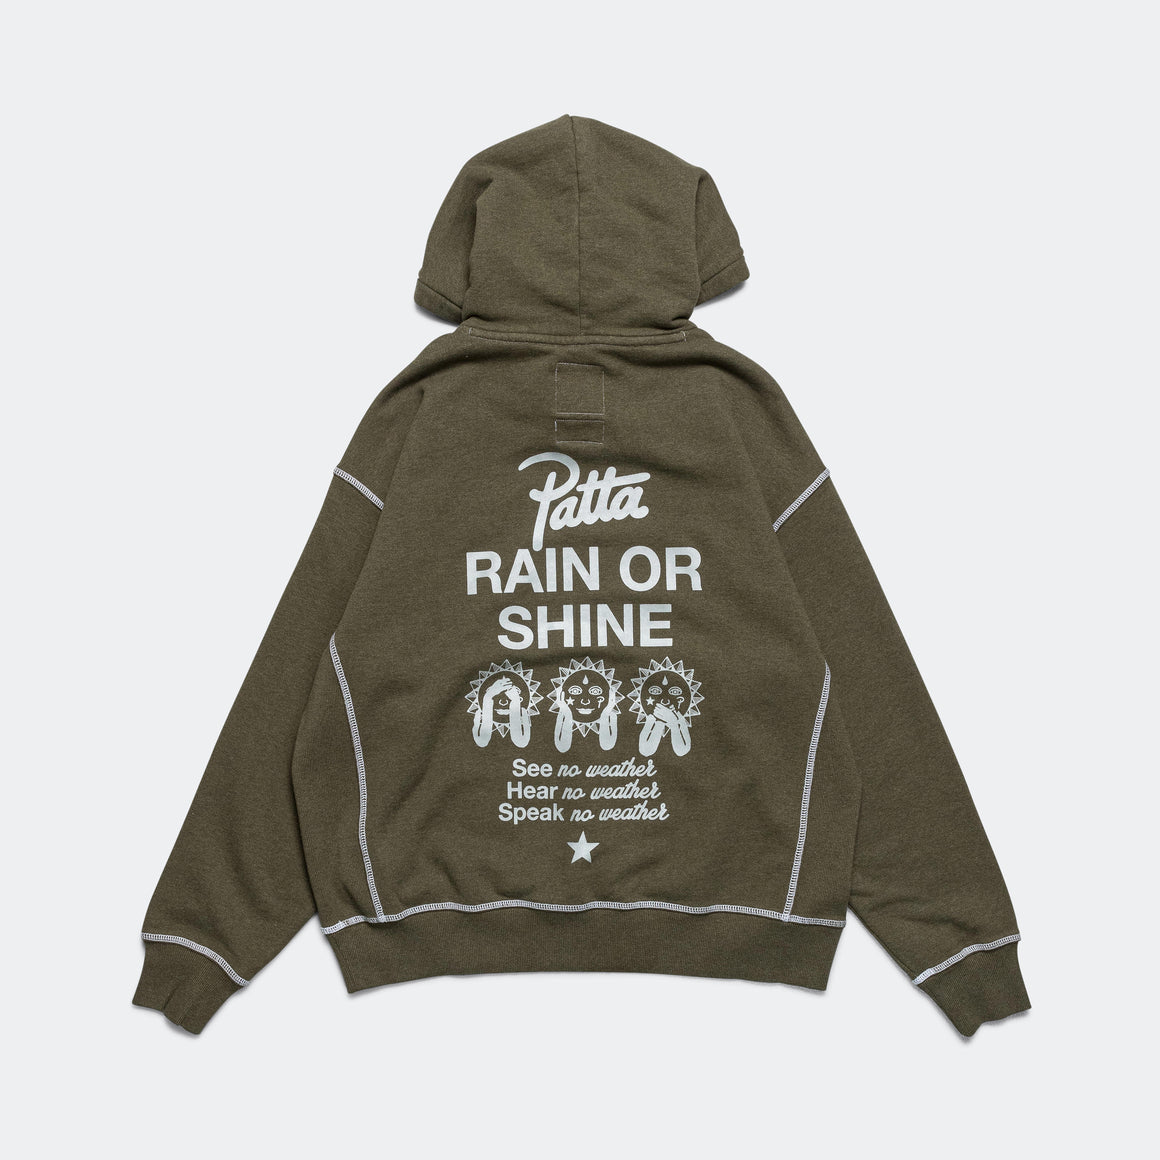 Converse - Rain or Shine Hoodie x Patta - Utility Green Heather - UP THERE